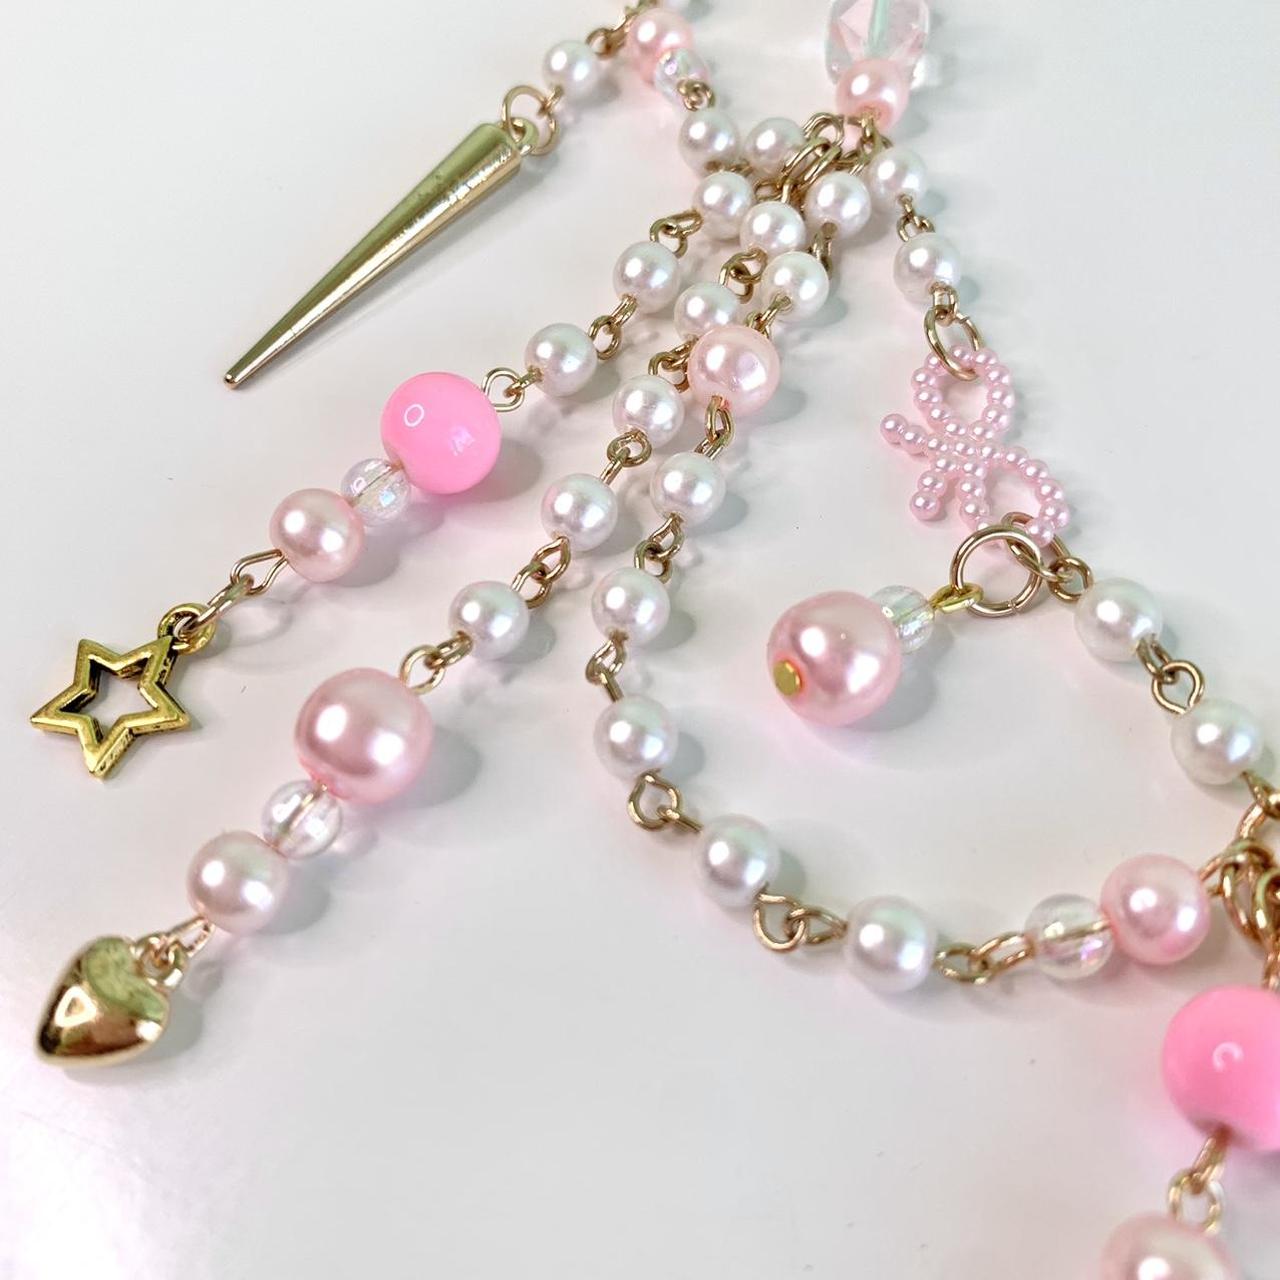 Sugarpill Women's Pink and Gold Jewellery (4)